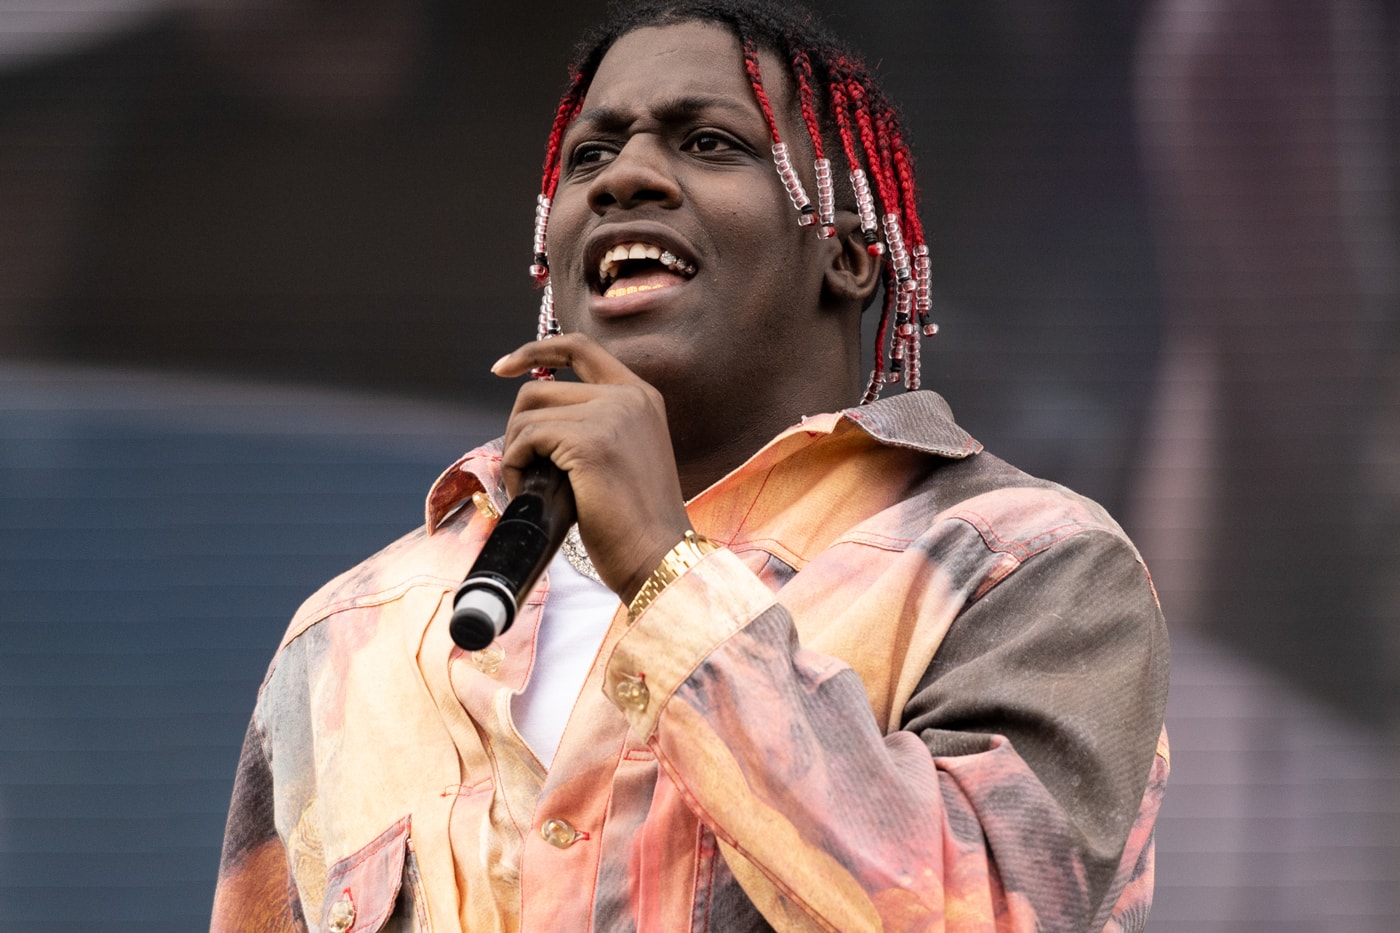 Lil Yachty Lil Boat 2 Album Leak Stream Download Preview 2017